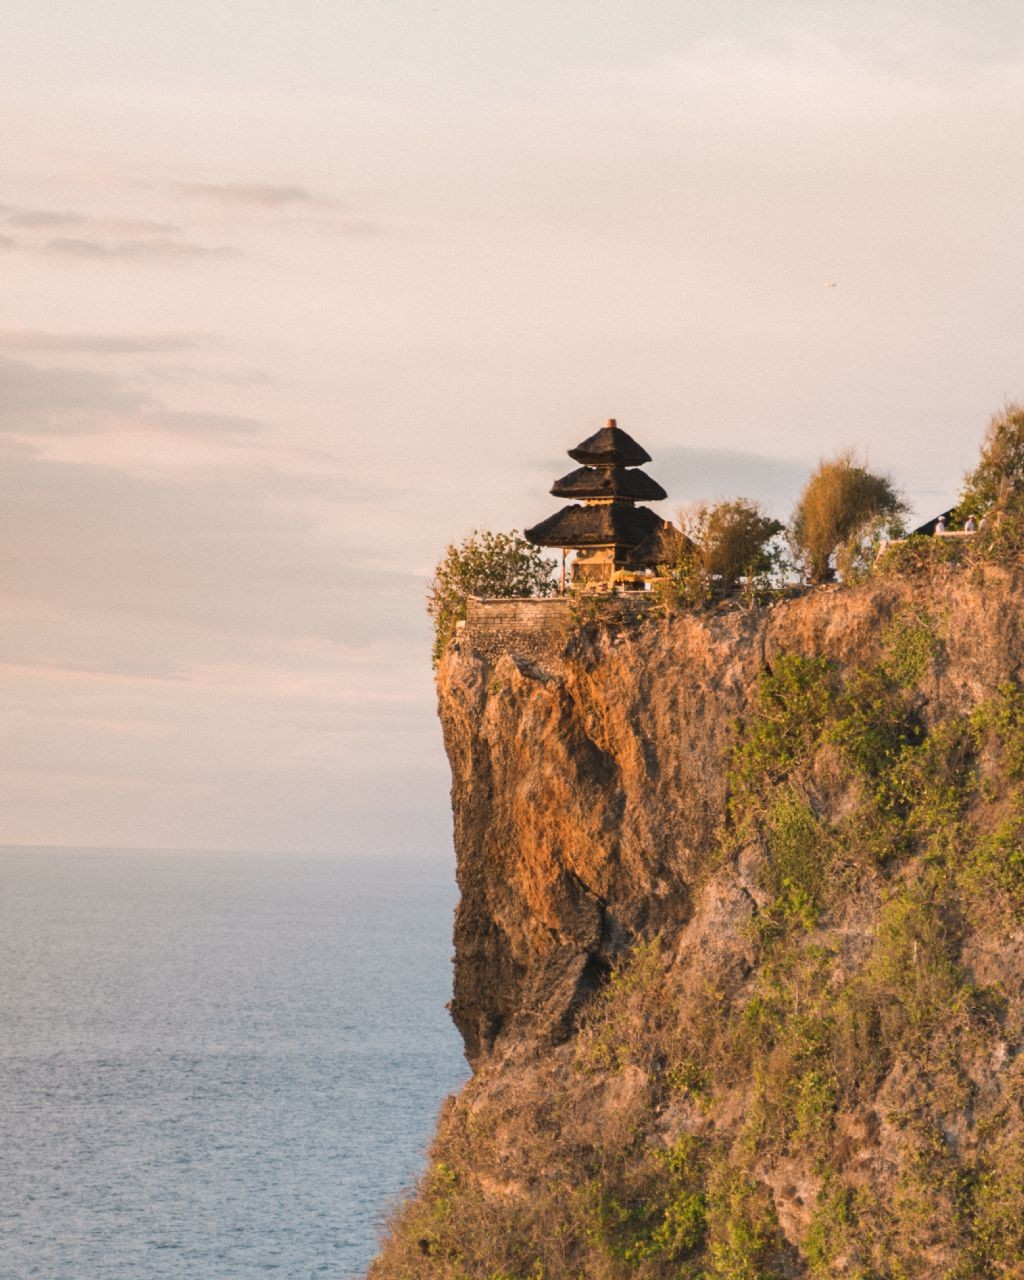 Famous for its dramatic cliffs and panoramic ocean views, Uluwatu is a must-visit destination for surfers and nature lovers